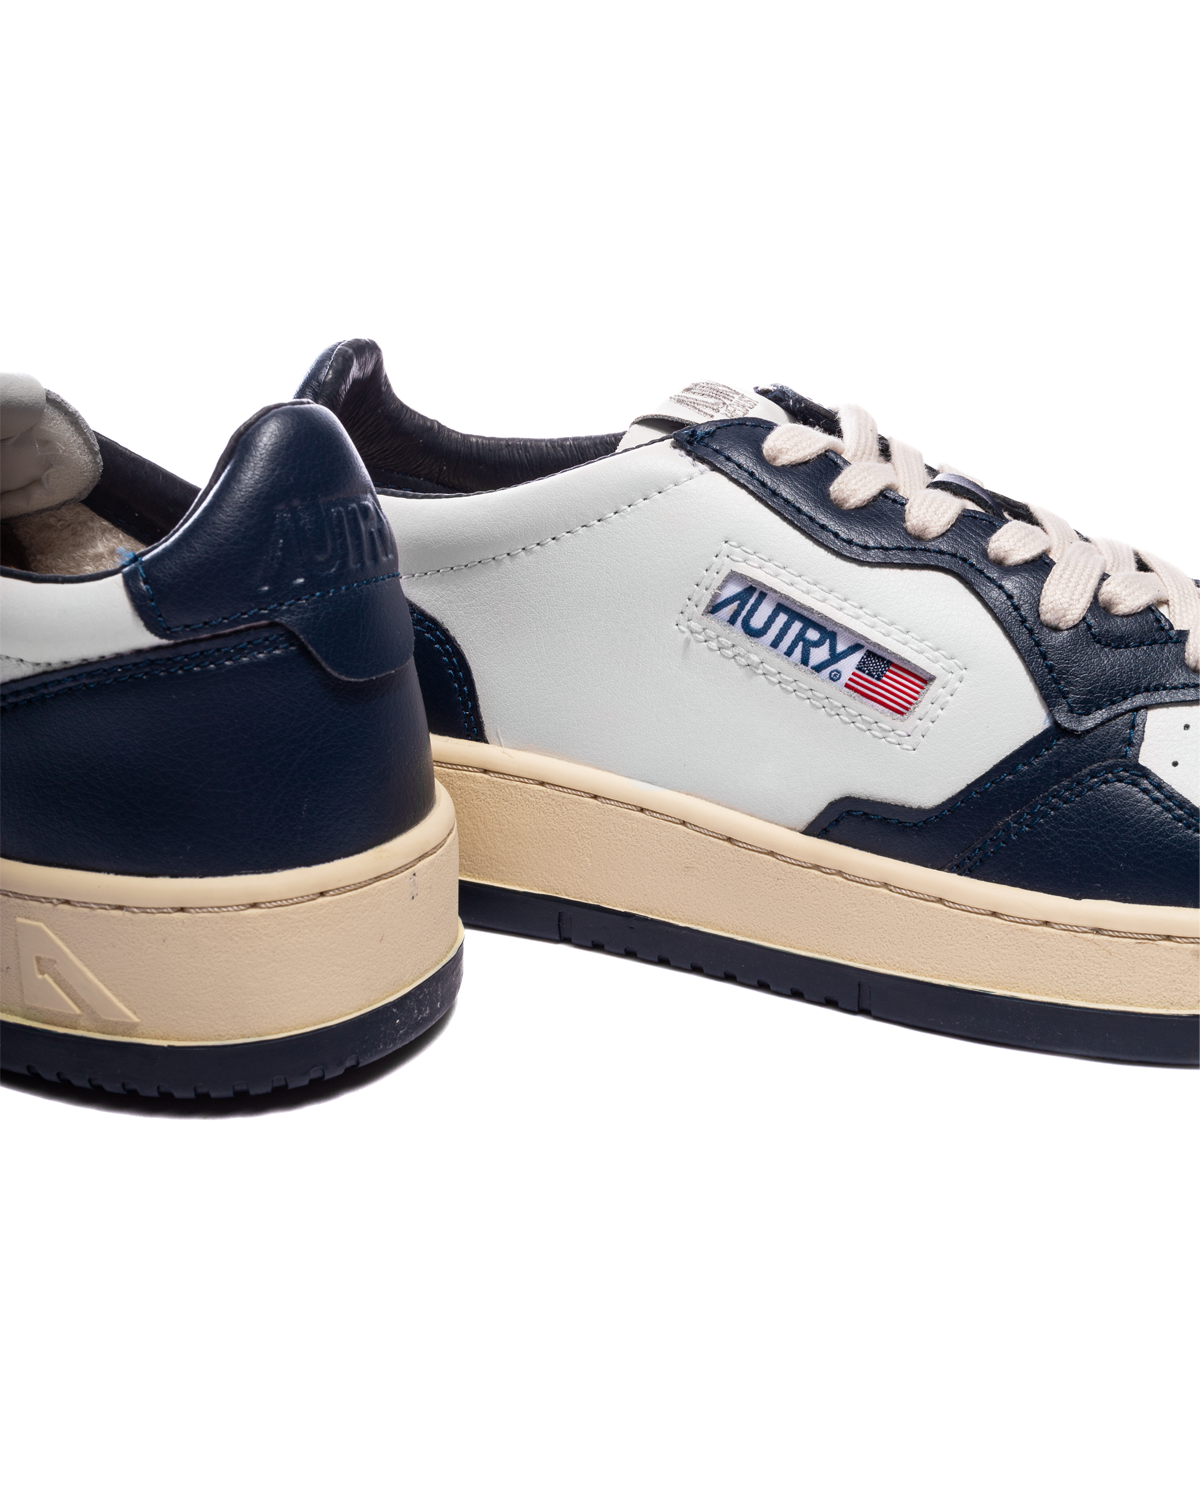 Medalist Low Leather/Leather White/Blue